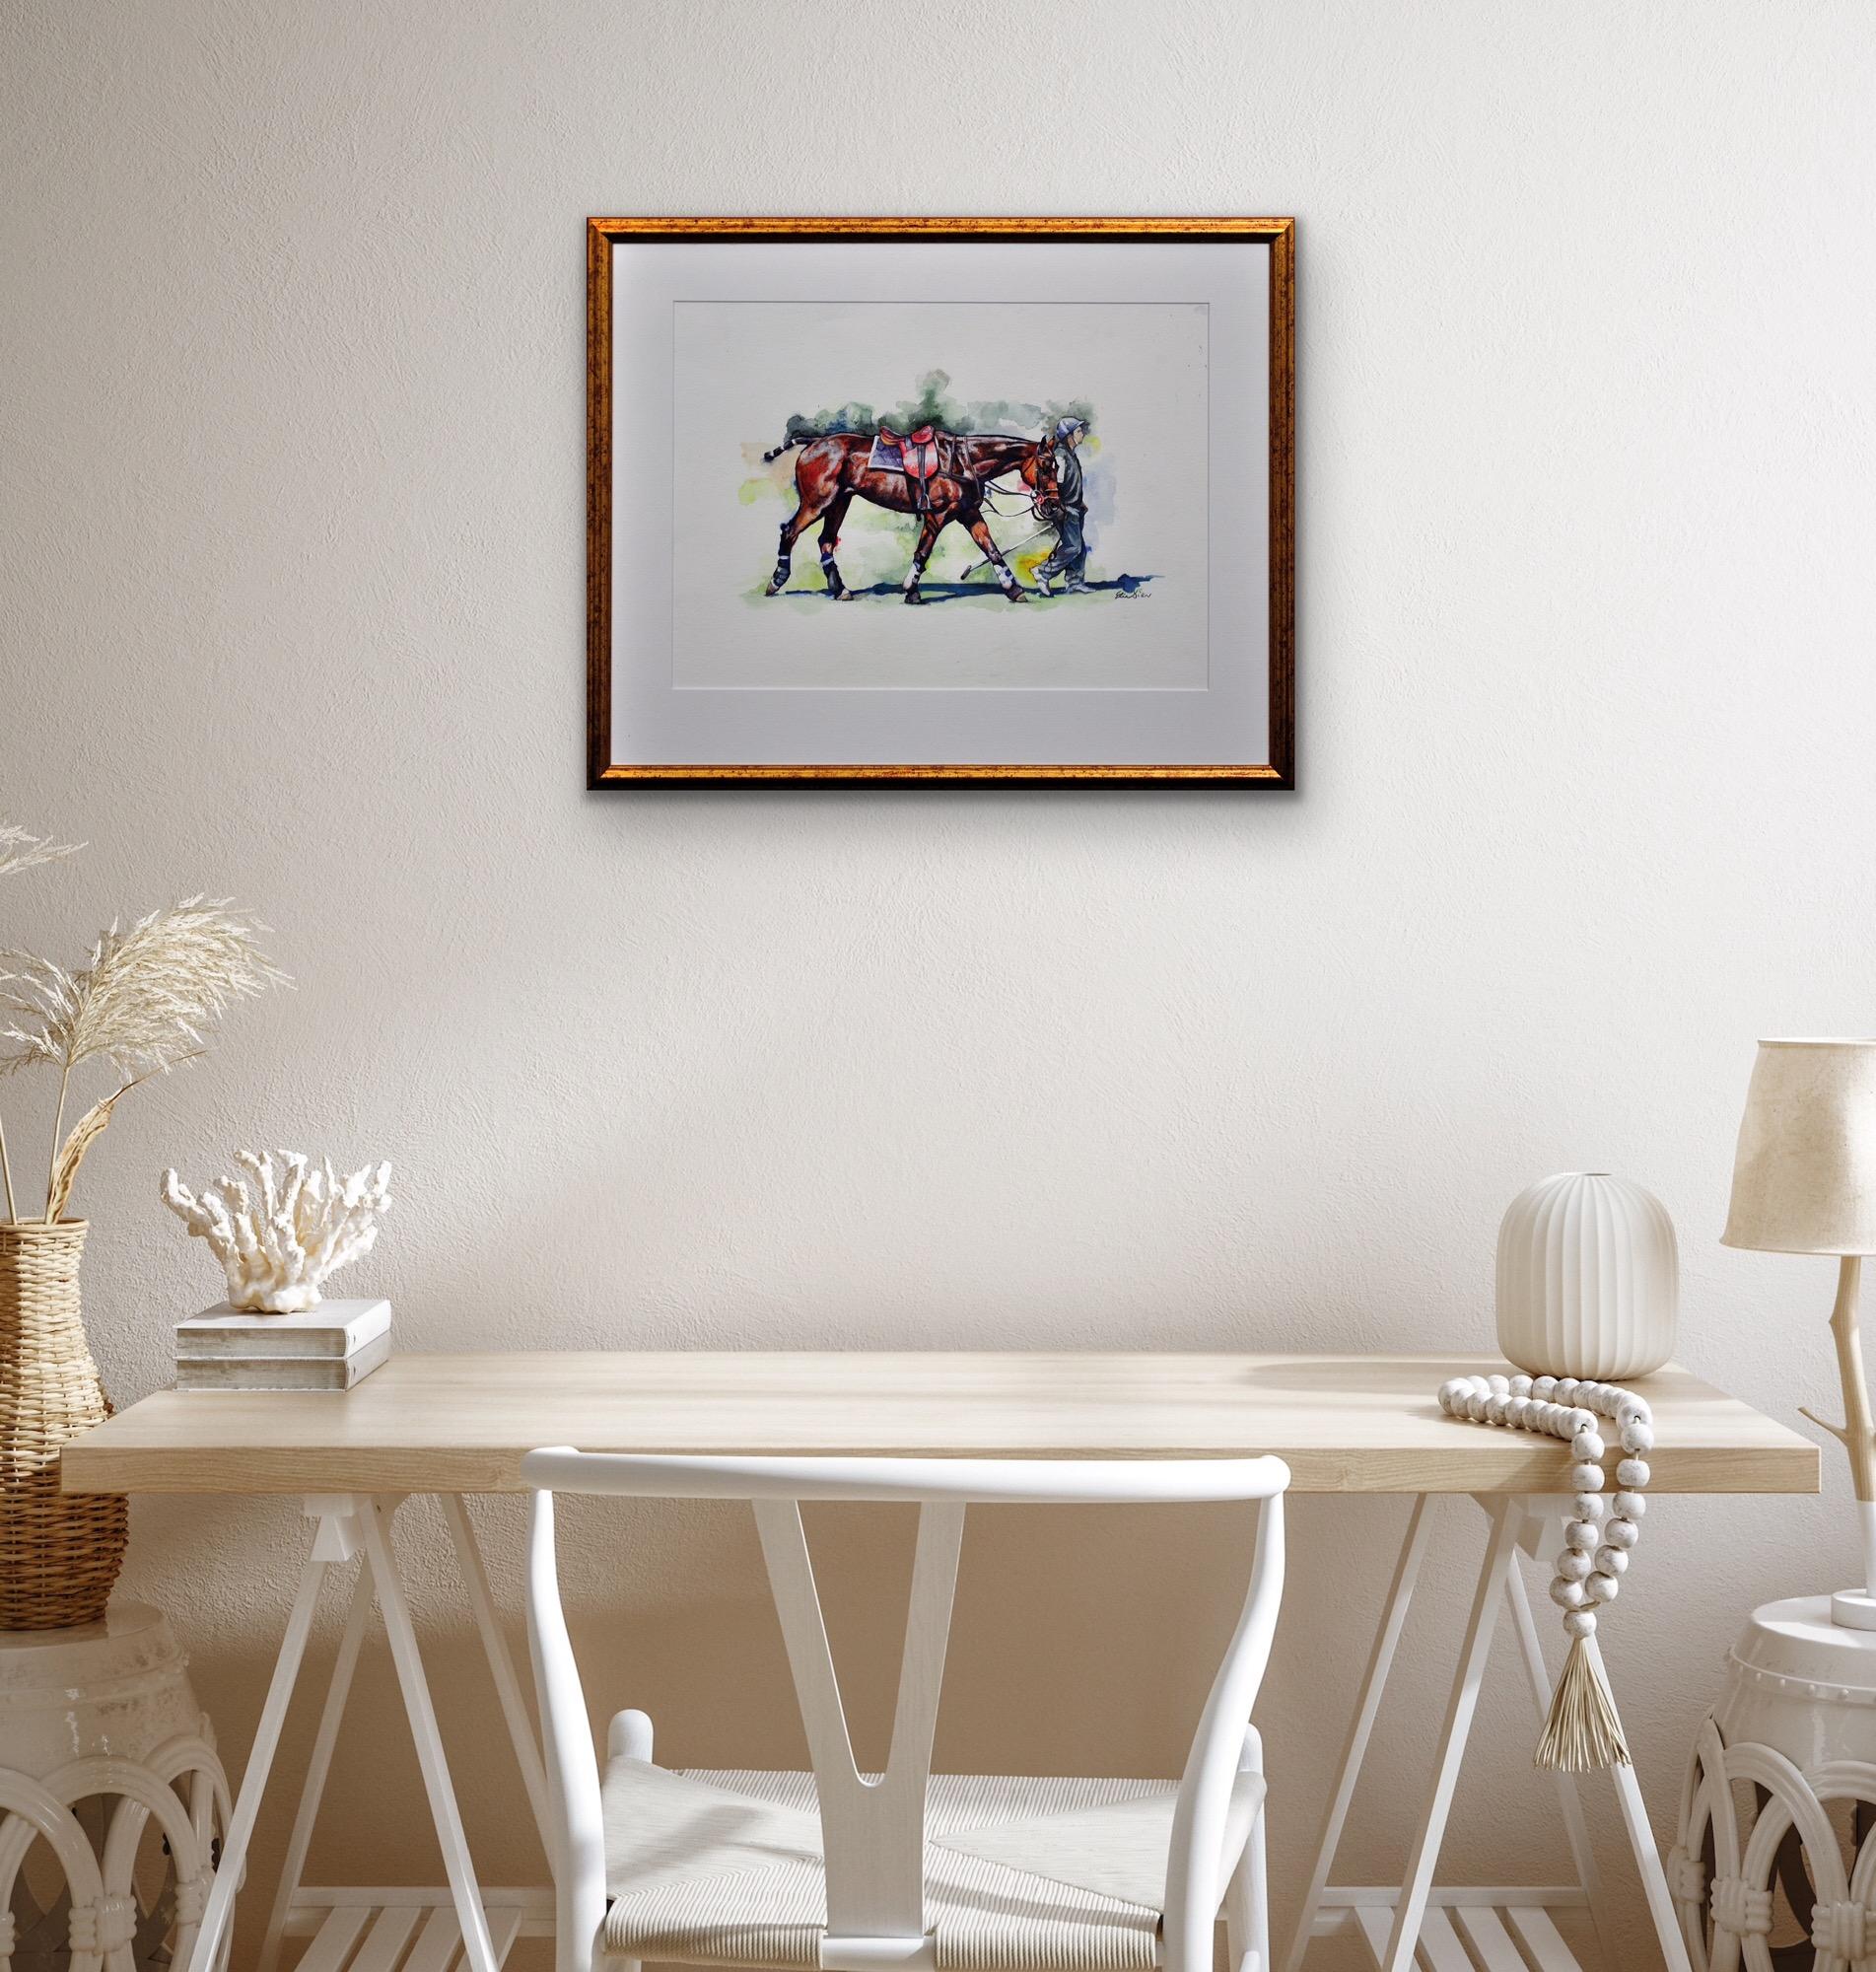 Polo Match, Cirencester, Player Leading Pony. Cotswolds. Framed Watercolor. For Sale 4